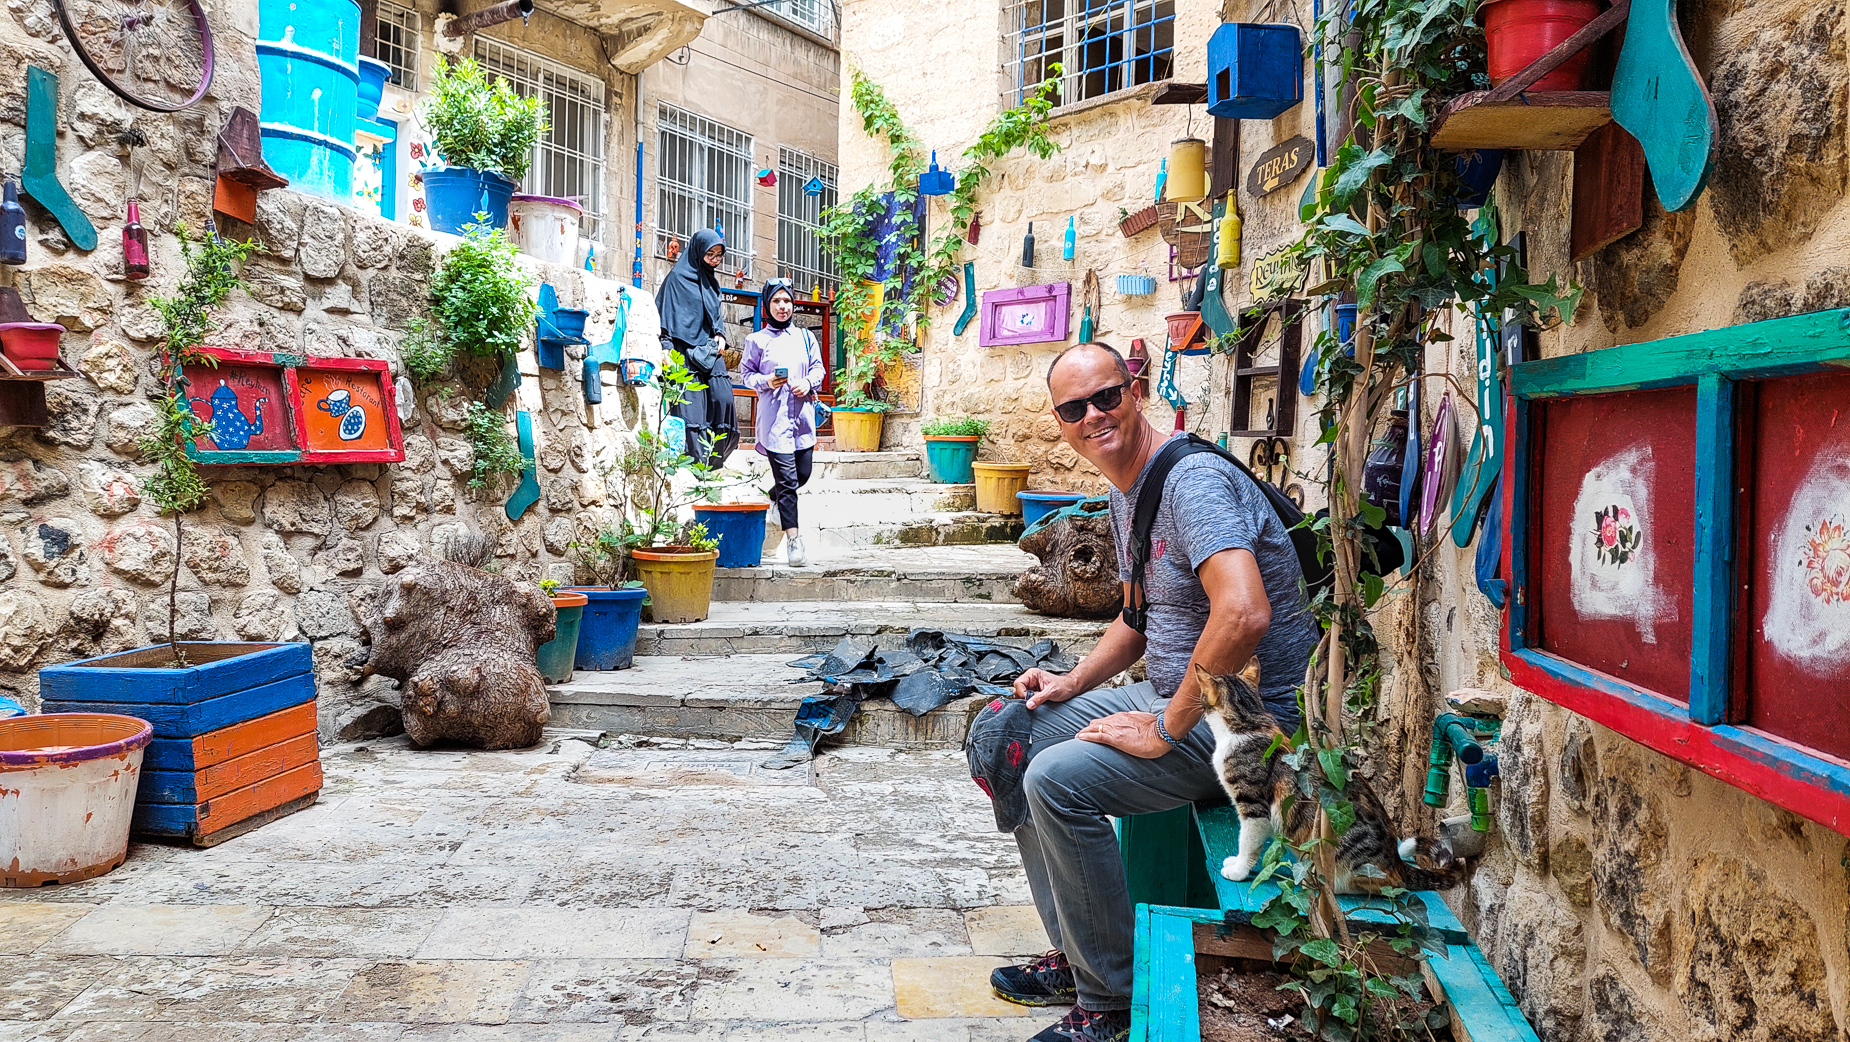 <span  class="uc_style_uc_tiles_grid_image_elementor_uc_items_attribute_title" style="color:#ffffff;">some kind of colorful alley in Mardin, cats everywhere</span>